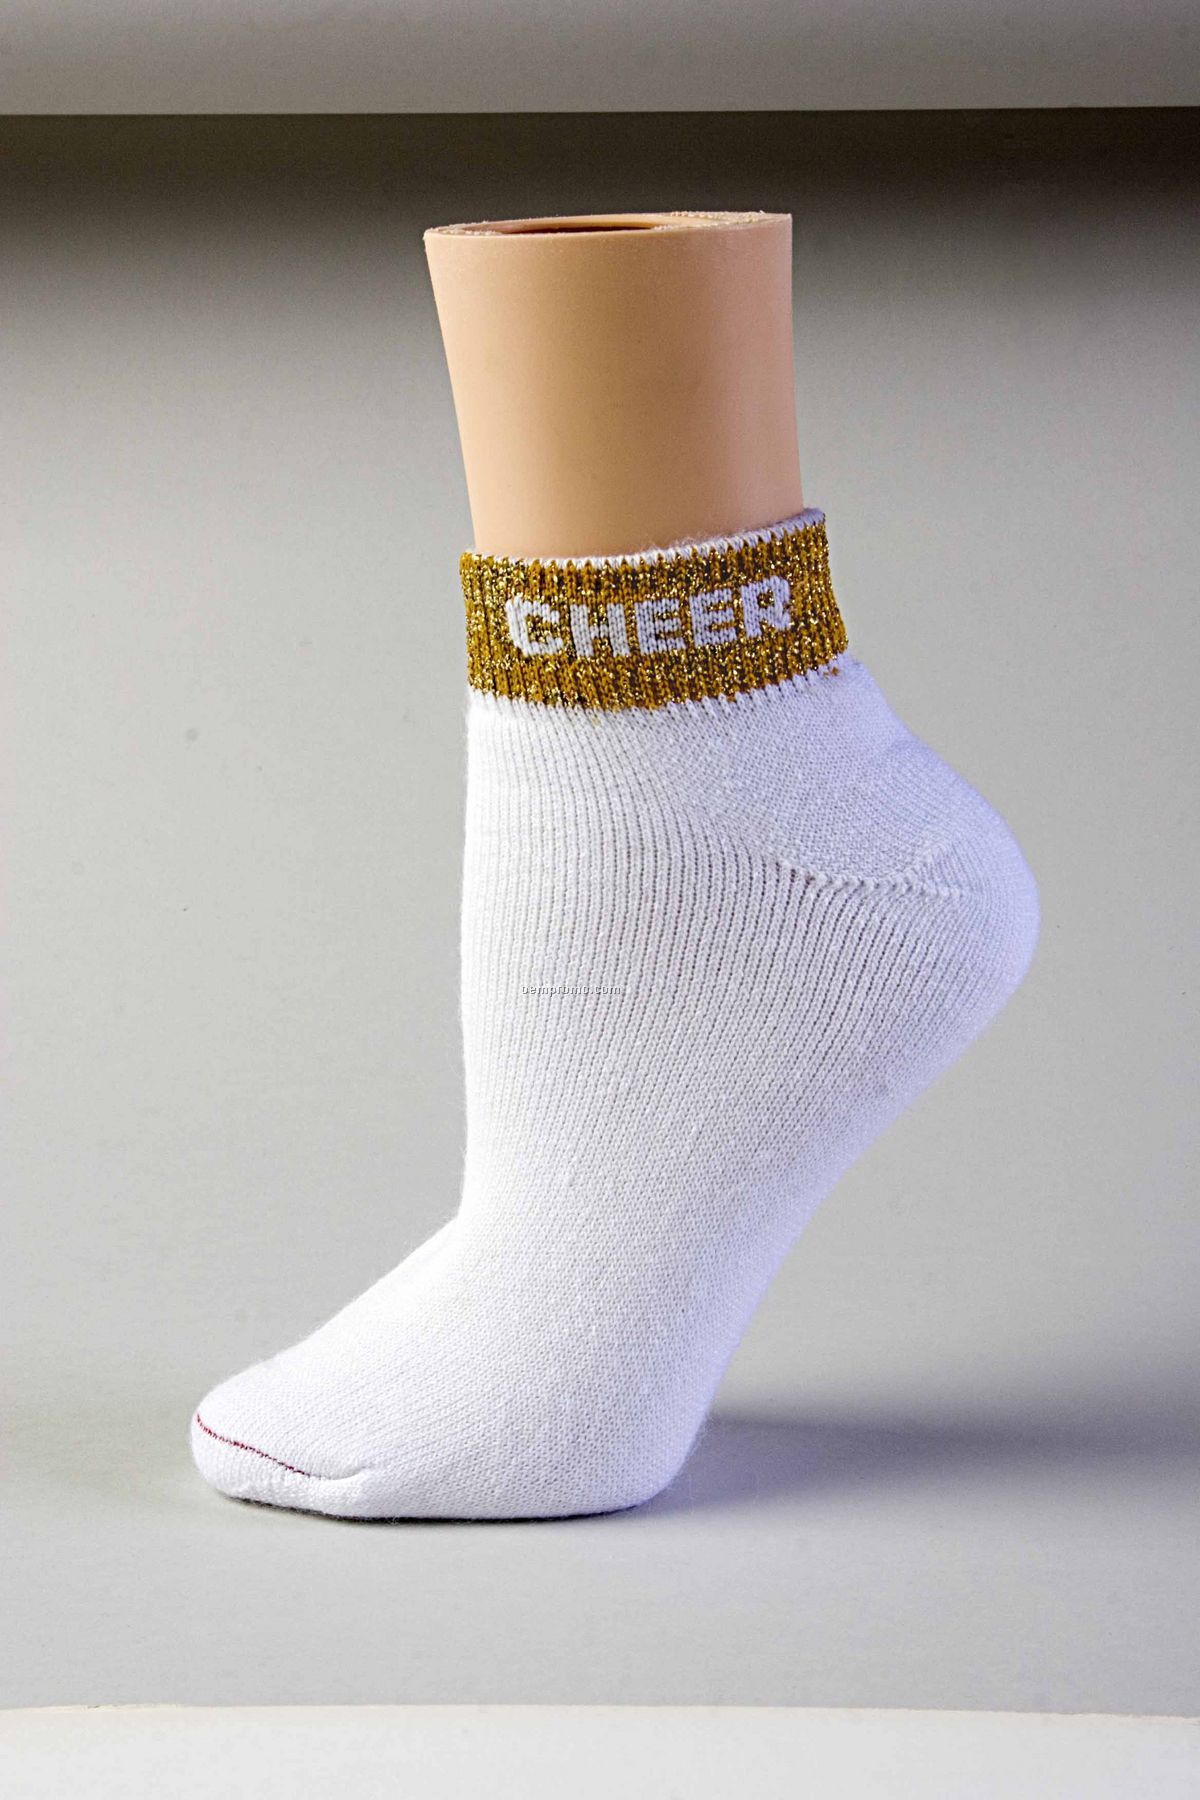 Pizzazz Cheer Anklet Sock - Youth/Adult